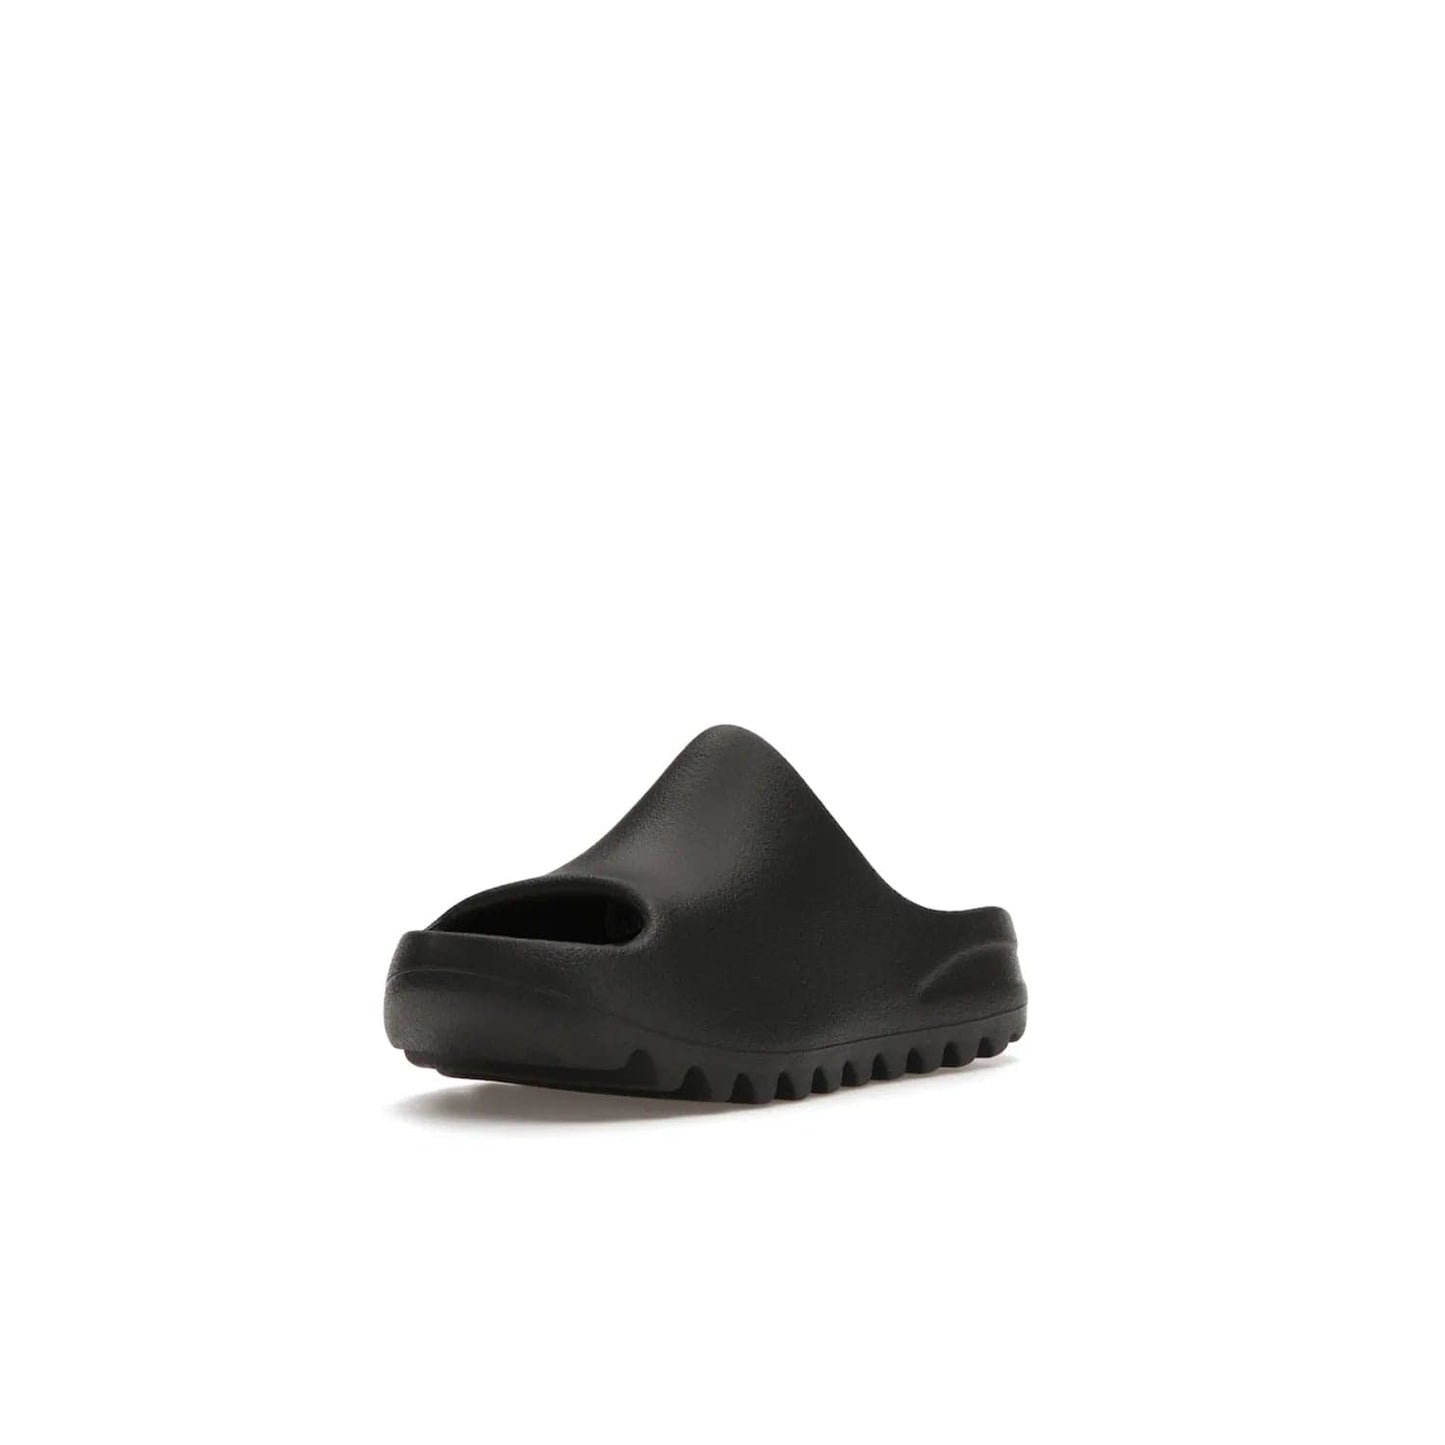 adidas Yeezy Slide Onyx (Kids) - Image 14 - Only at www.BallersClubKickz.com - adidas Yeezy Slide Onyx (Kids): Comfortable foam construction with textured surface and iconic three-stripe logo. Breathable, open-toe design and deep grooves for traction. Released in March 2021 at $50.